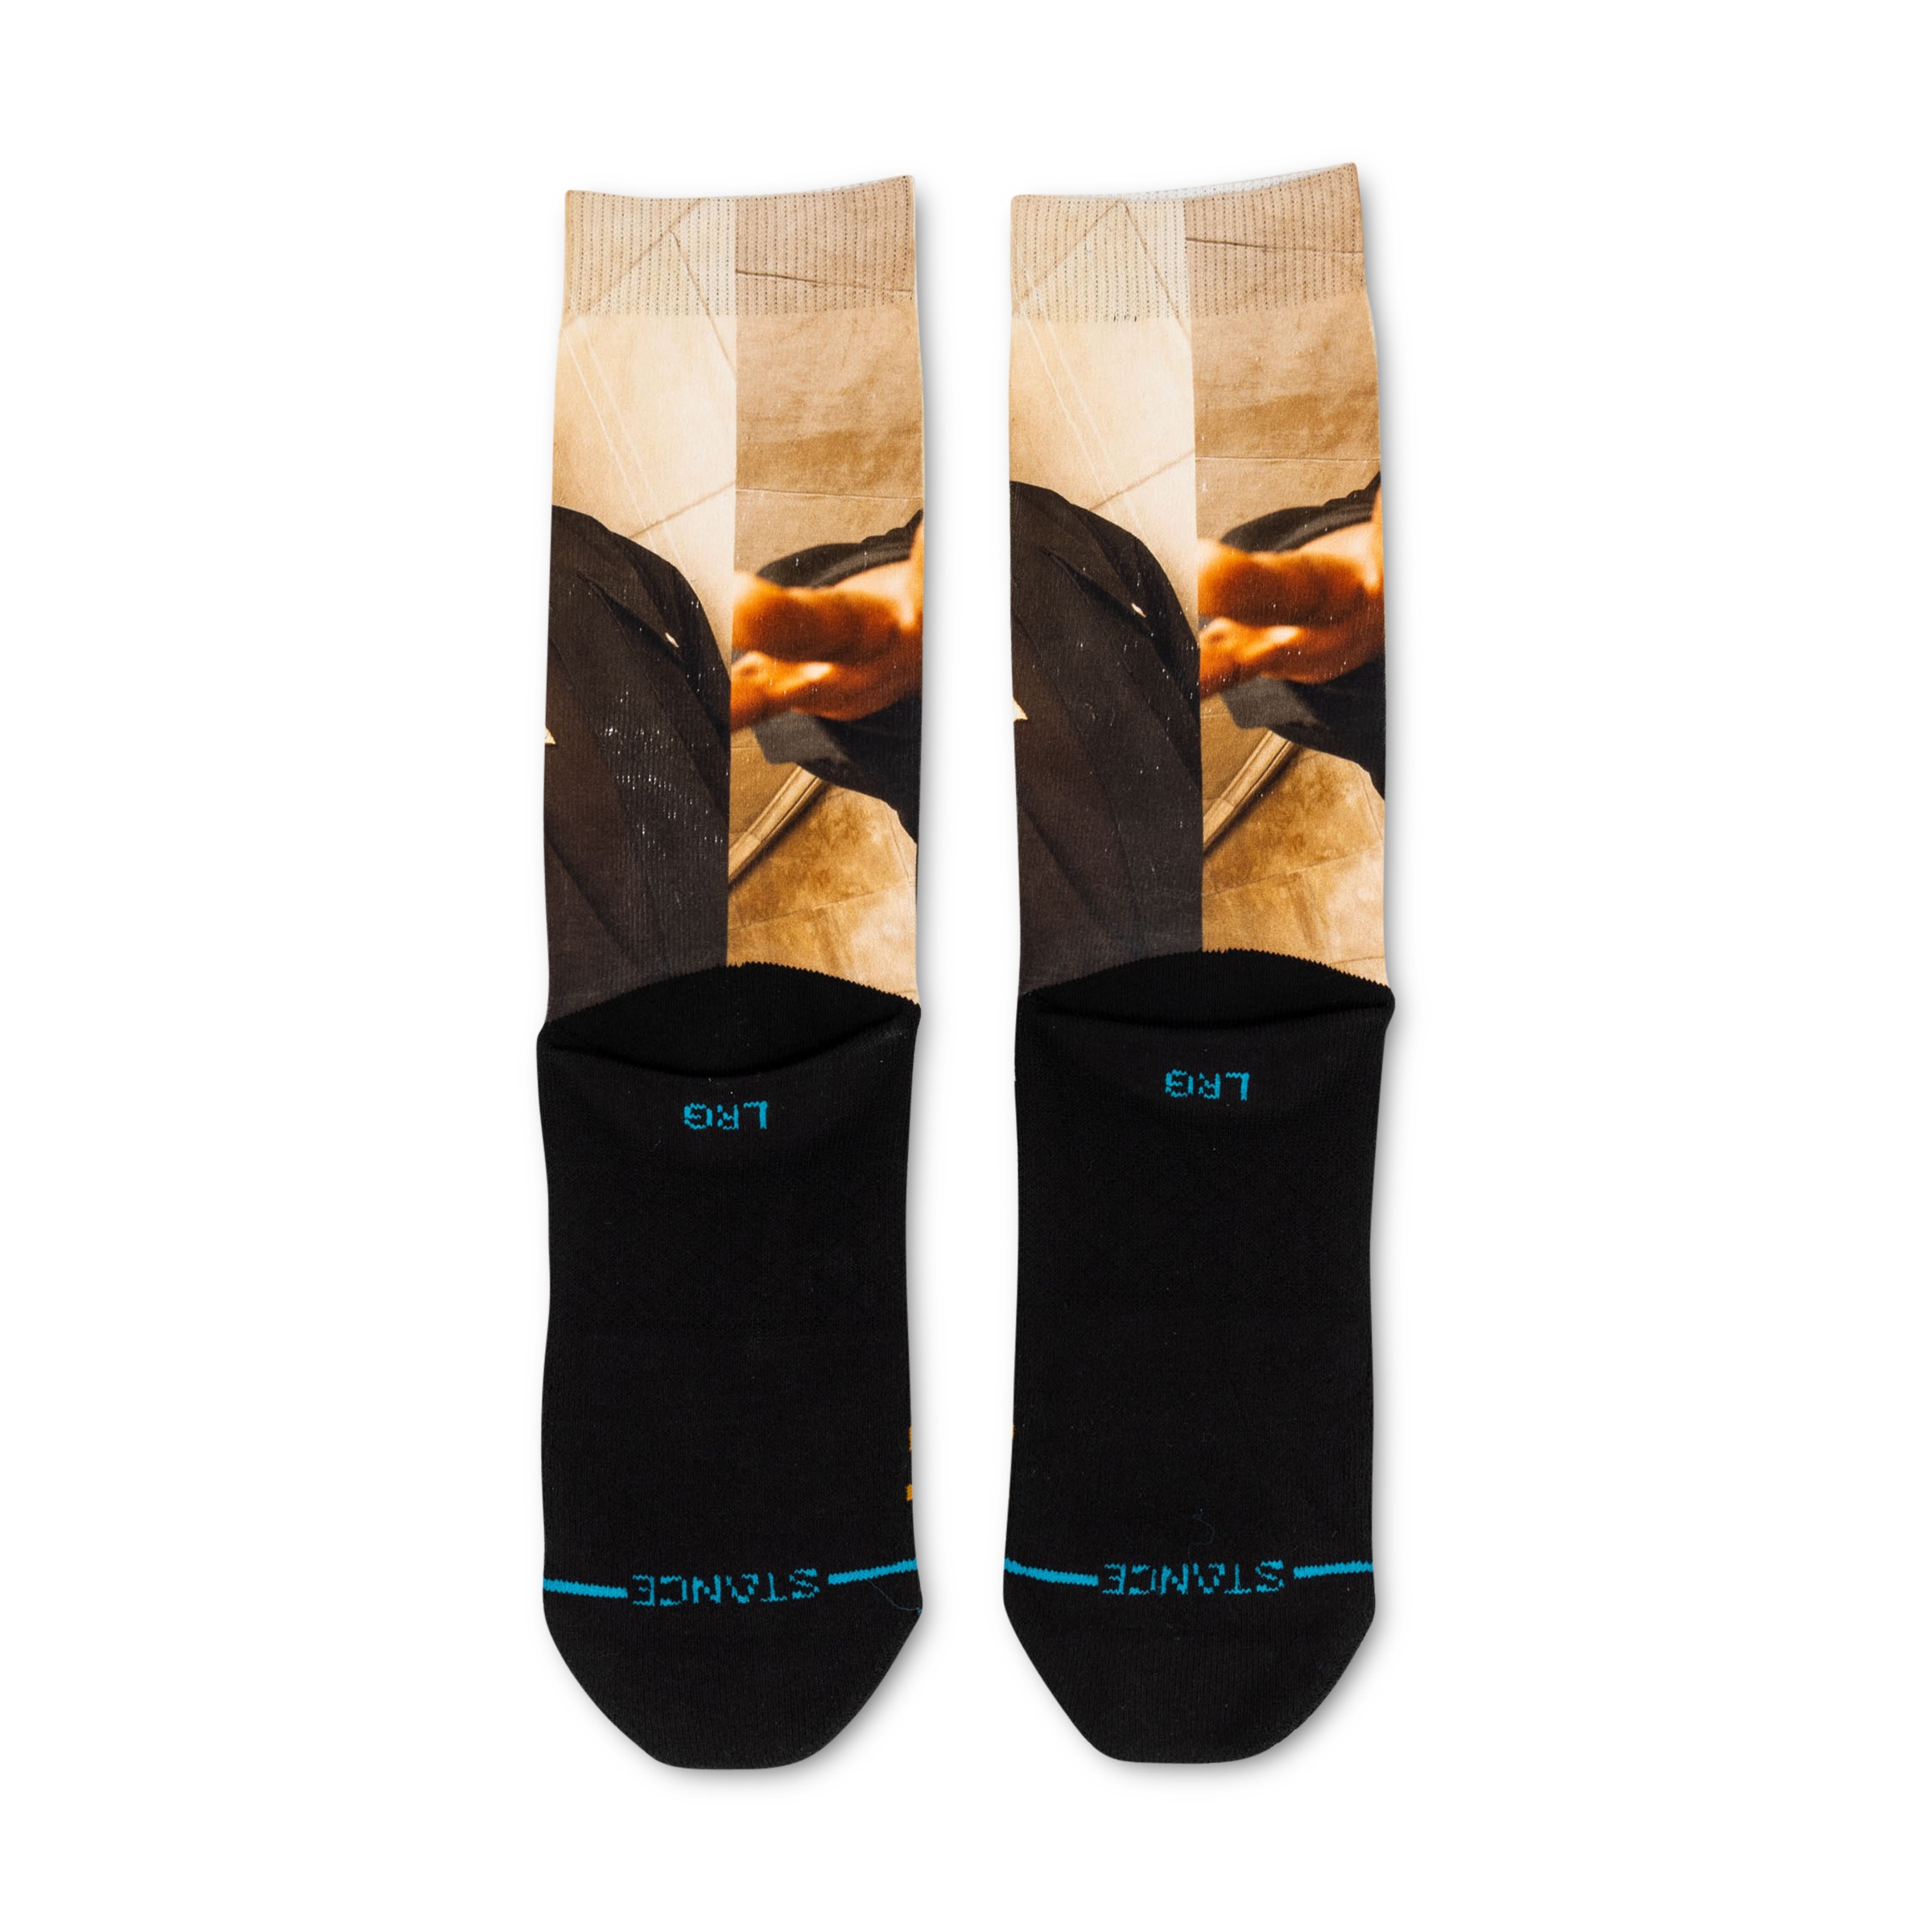 Adult Stance The Notorious B.I.G X The King of NY Crew Socks